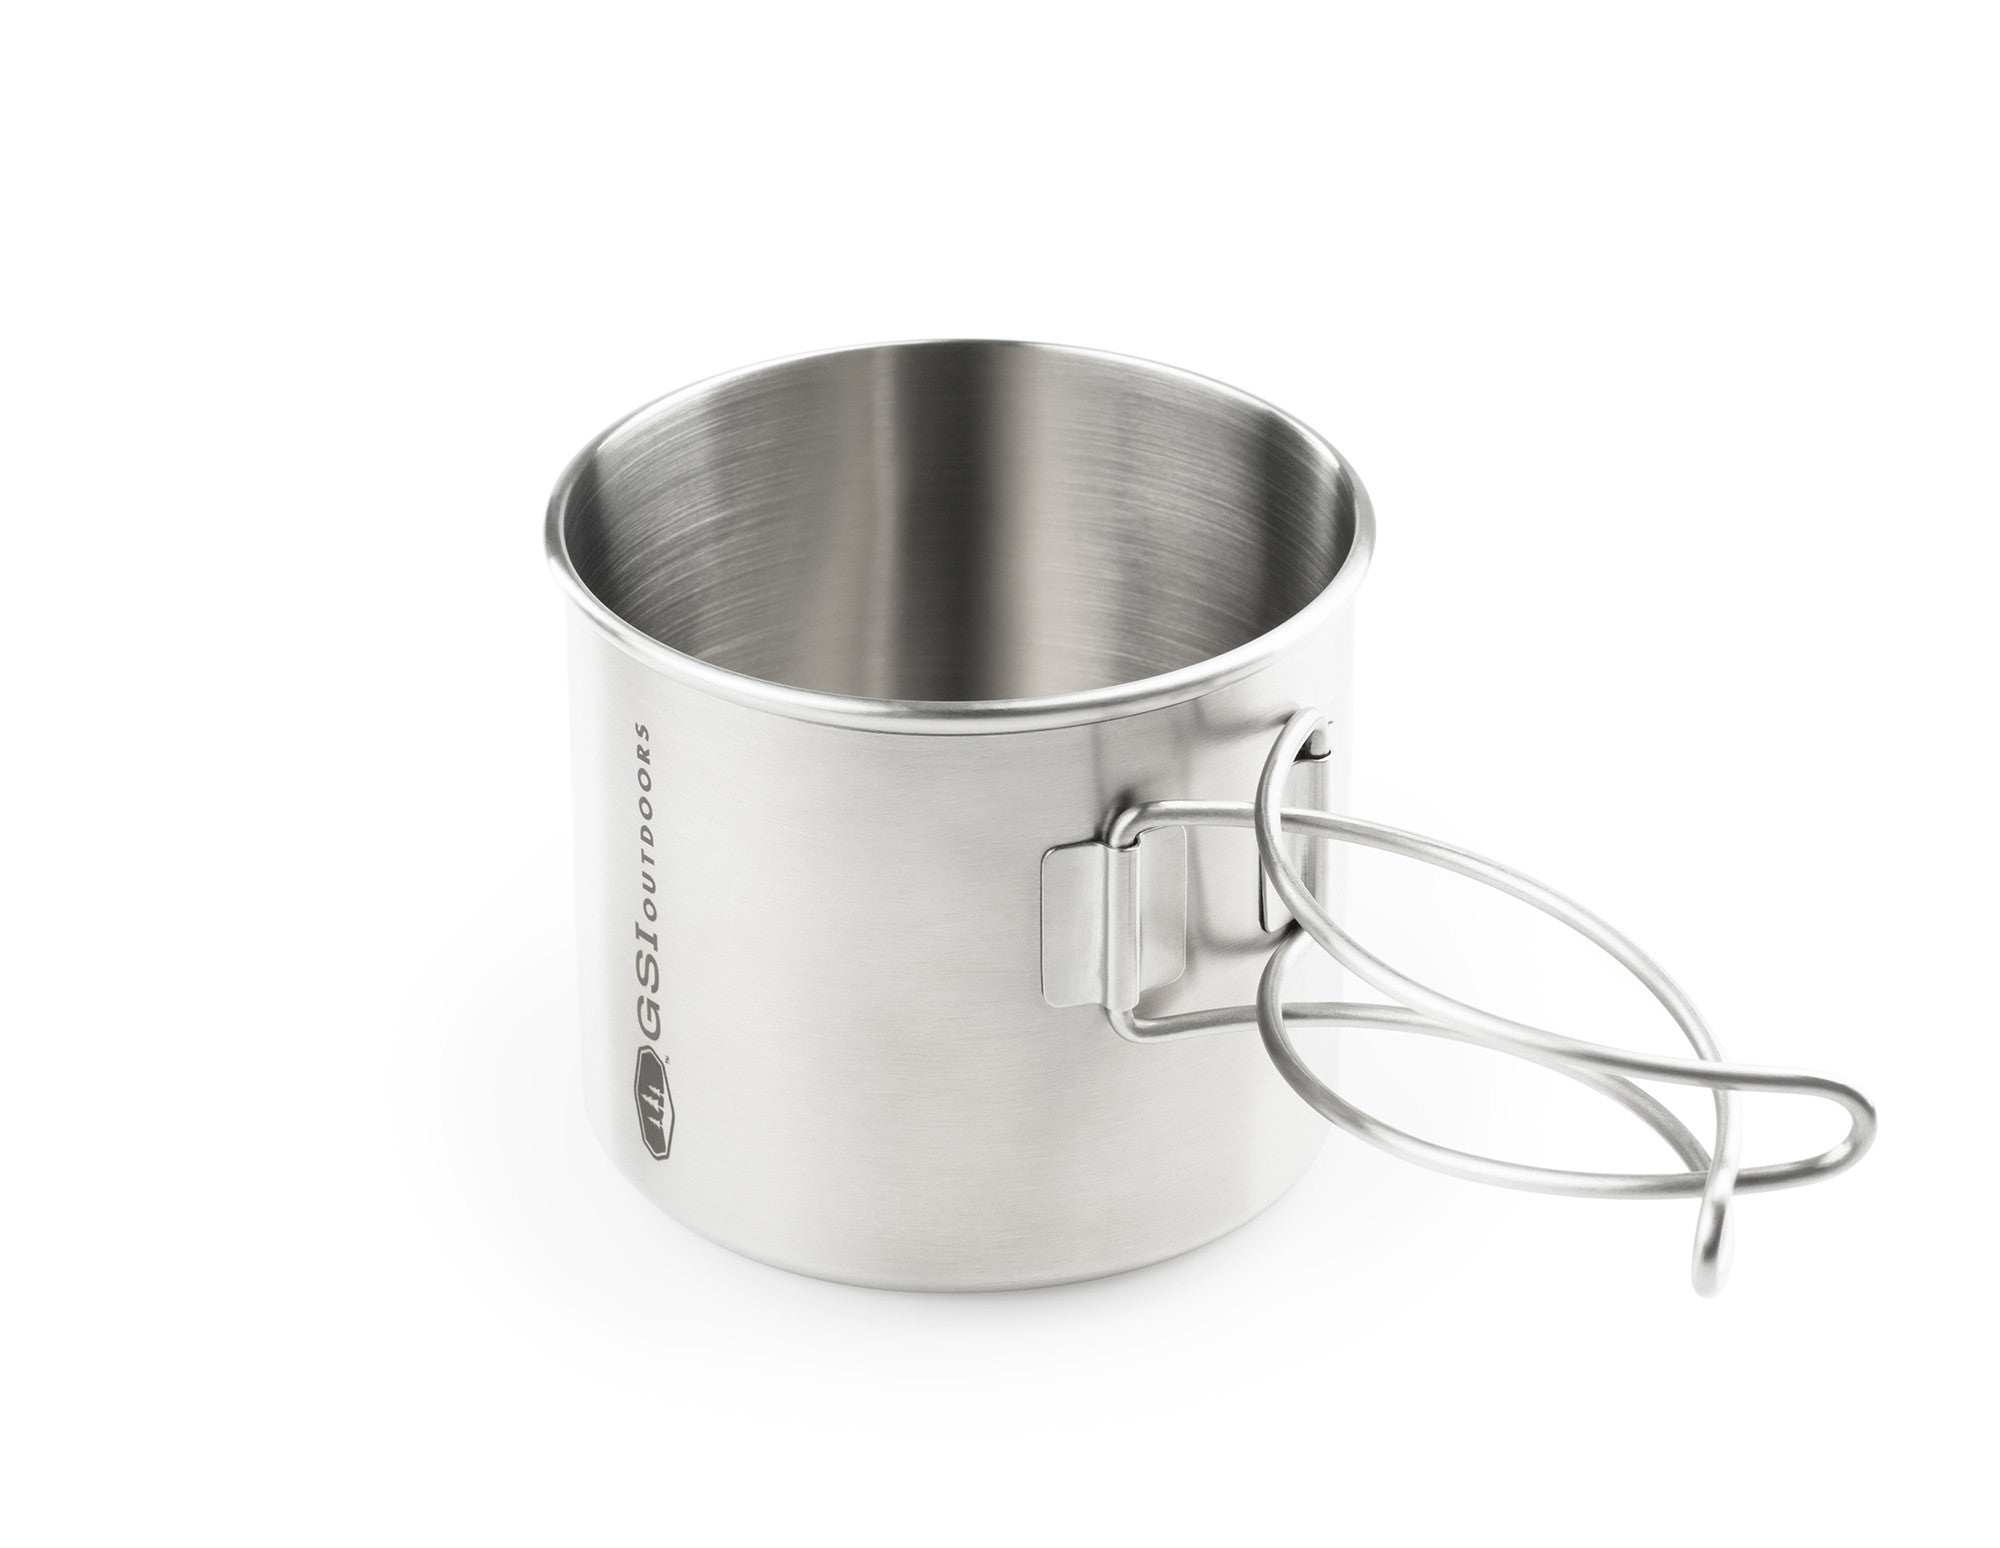 Backpacking　Cup　Glacier　Outdoors　Stainless　GSI